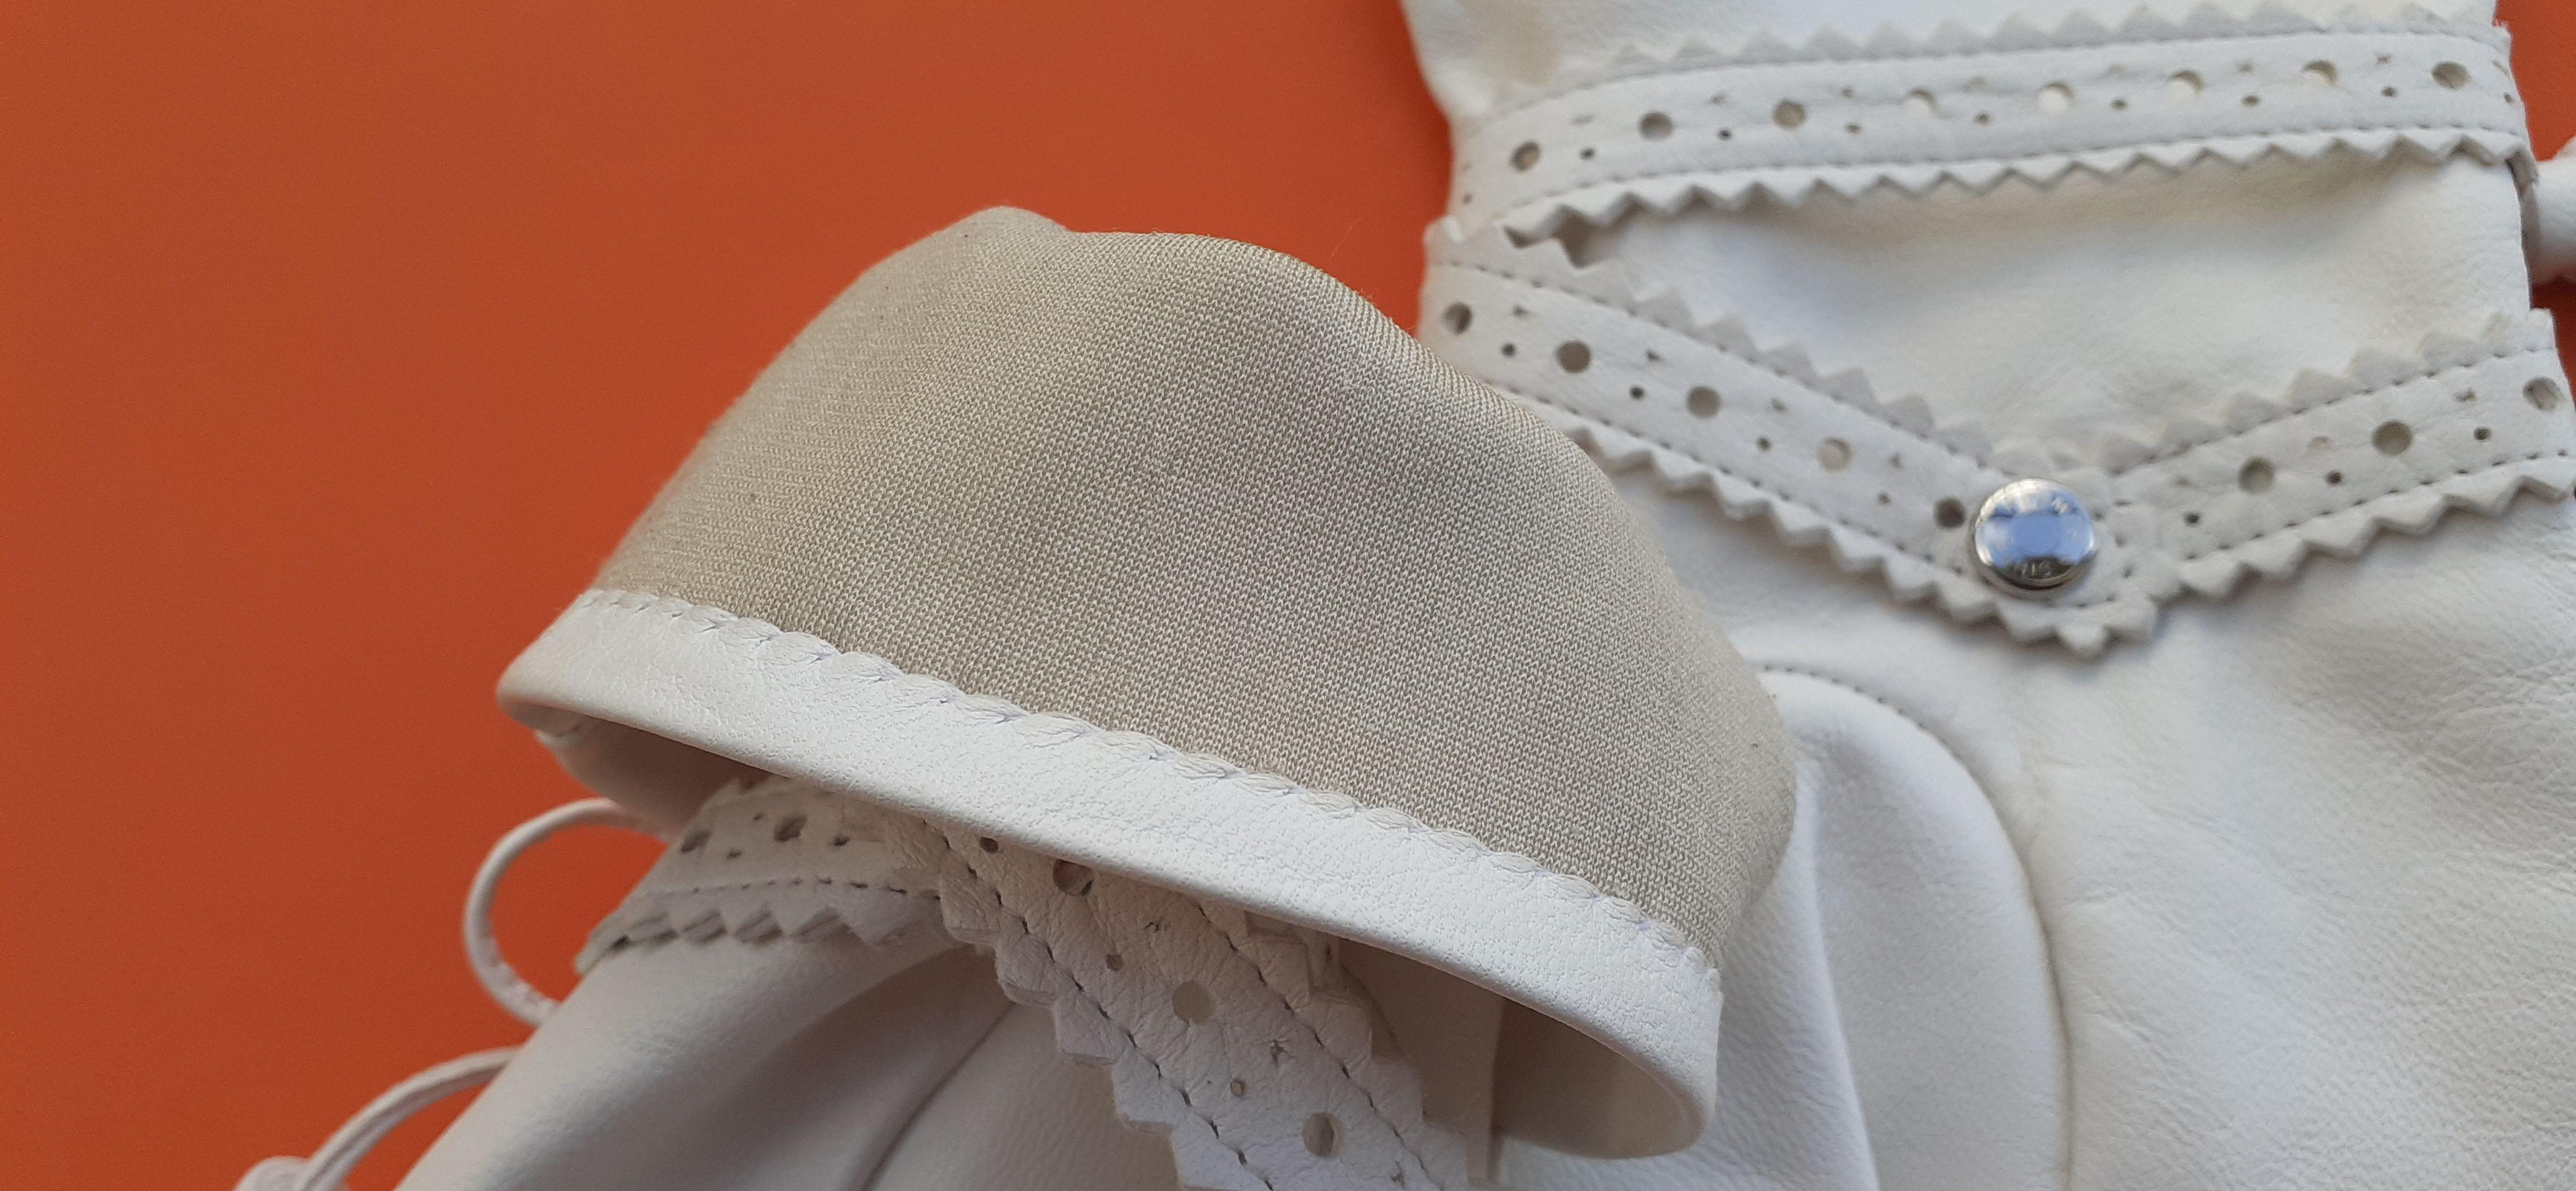 Lovely Hermès White Leather and Silk Gloves Ghillies Size 6.5 For Sale 8